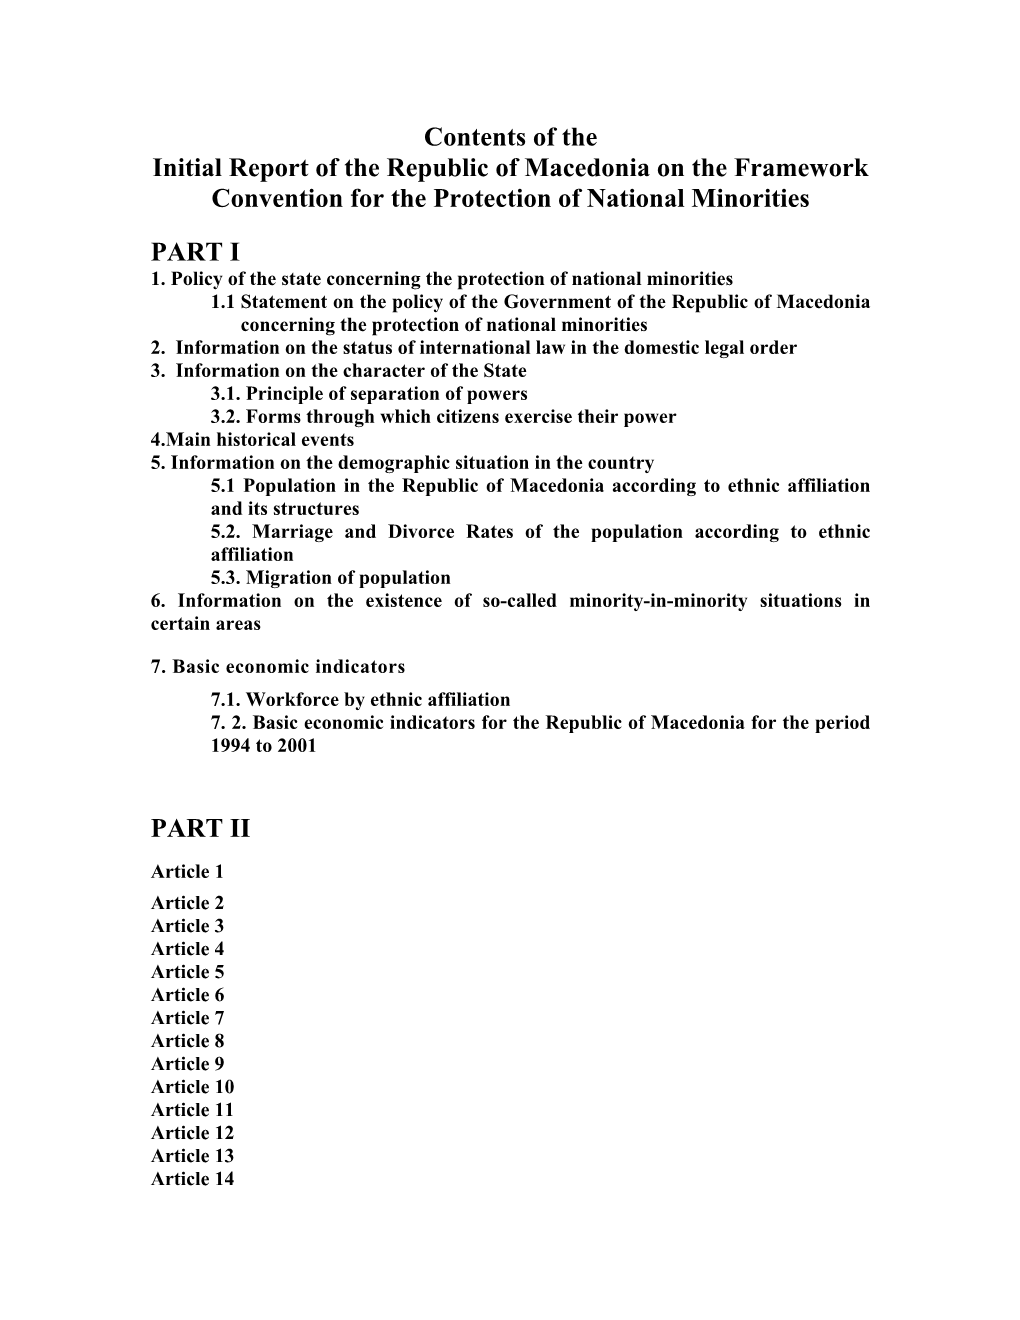 Contents of the Initial Report of the Republic of Macedonia on the Framework Convention for the Protection of National Minorities